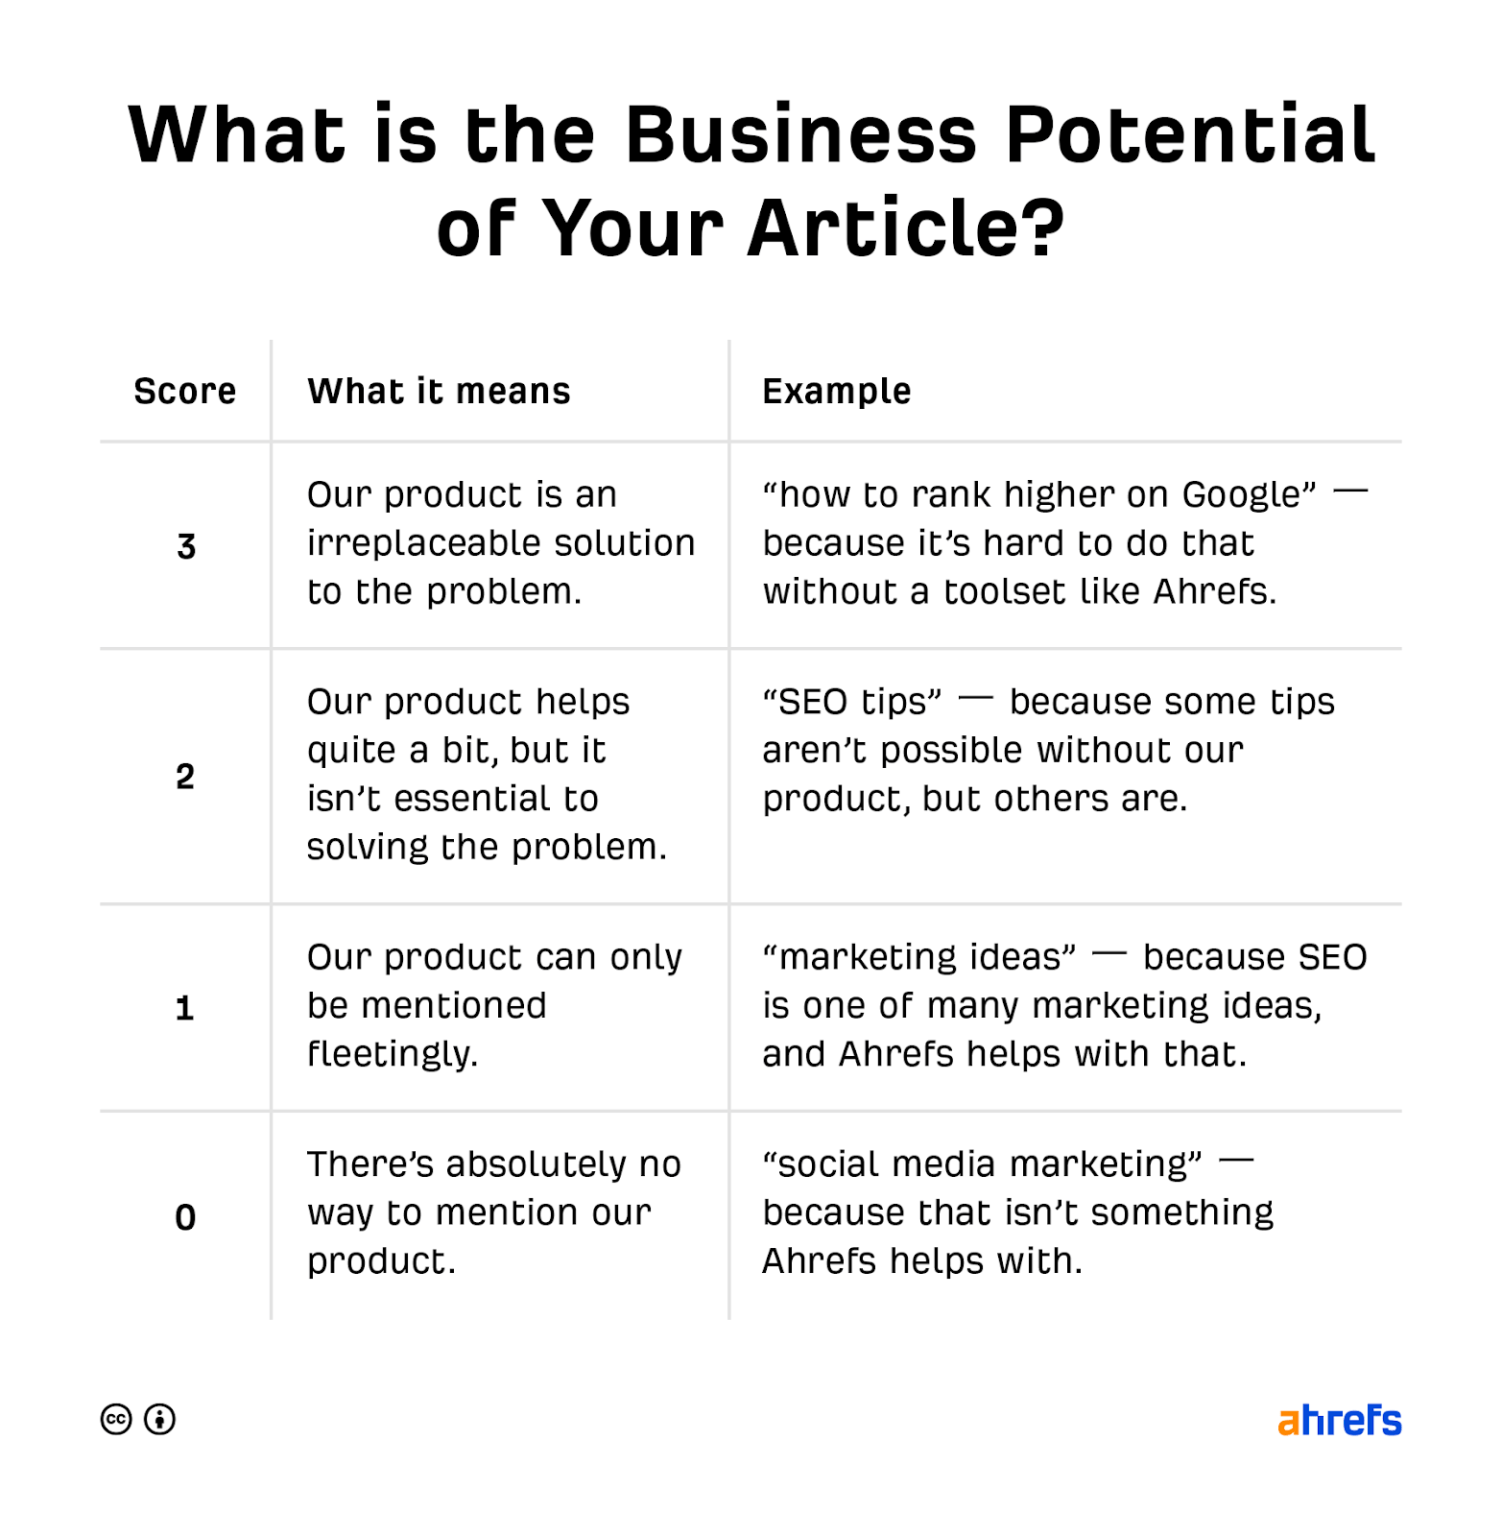 How we score topics by their business potential